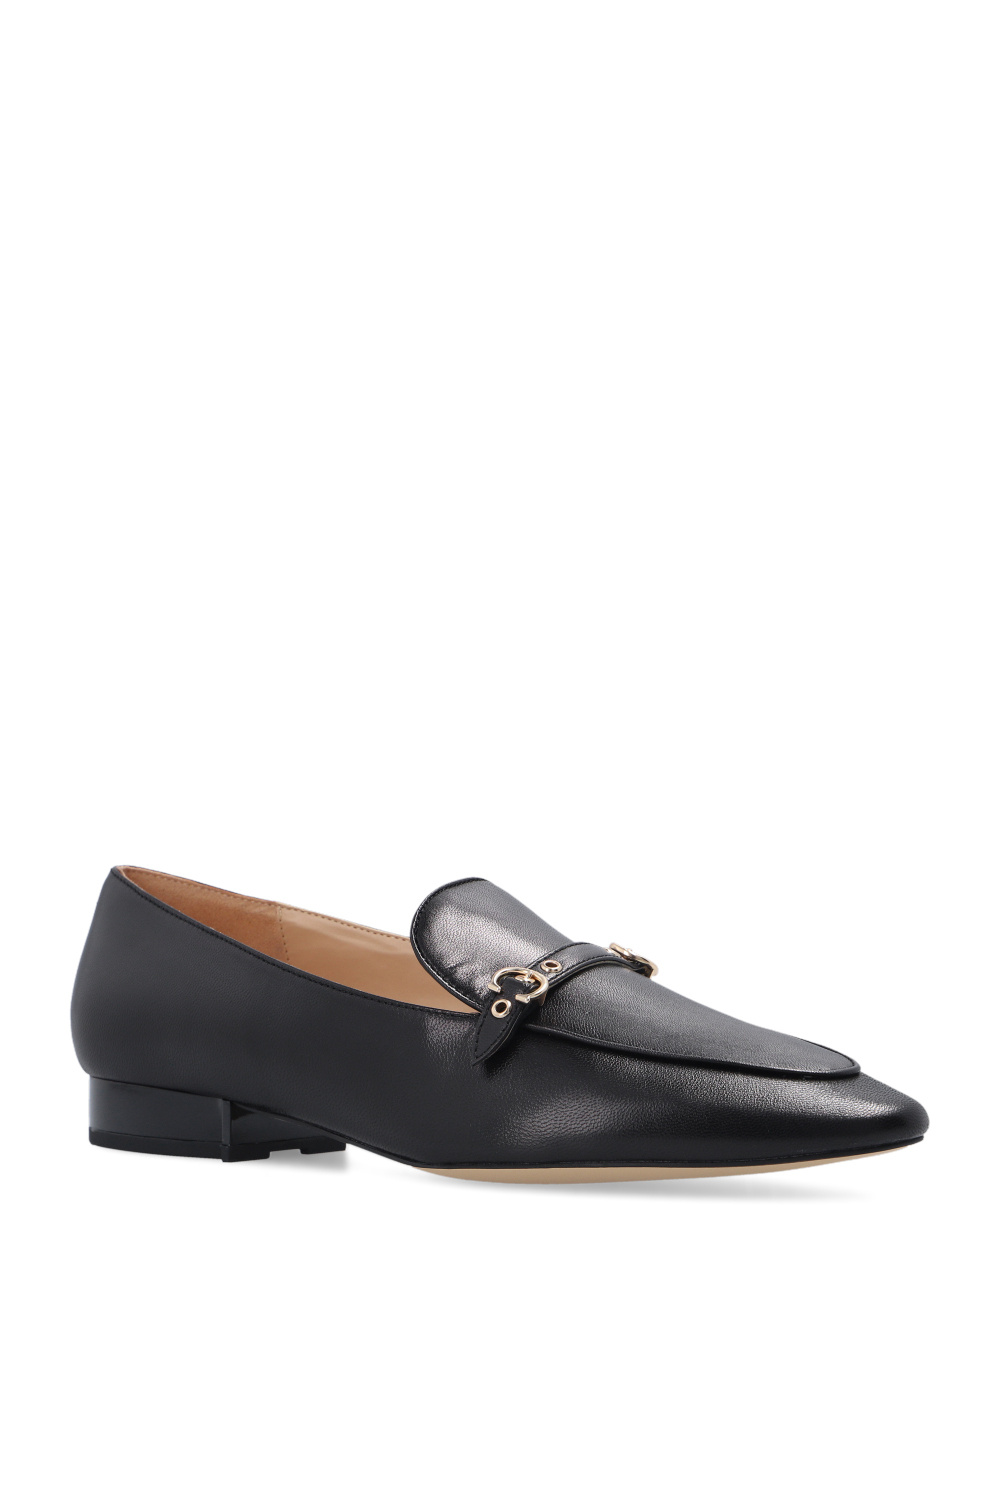 Coach Jess Leather Loafers